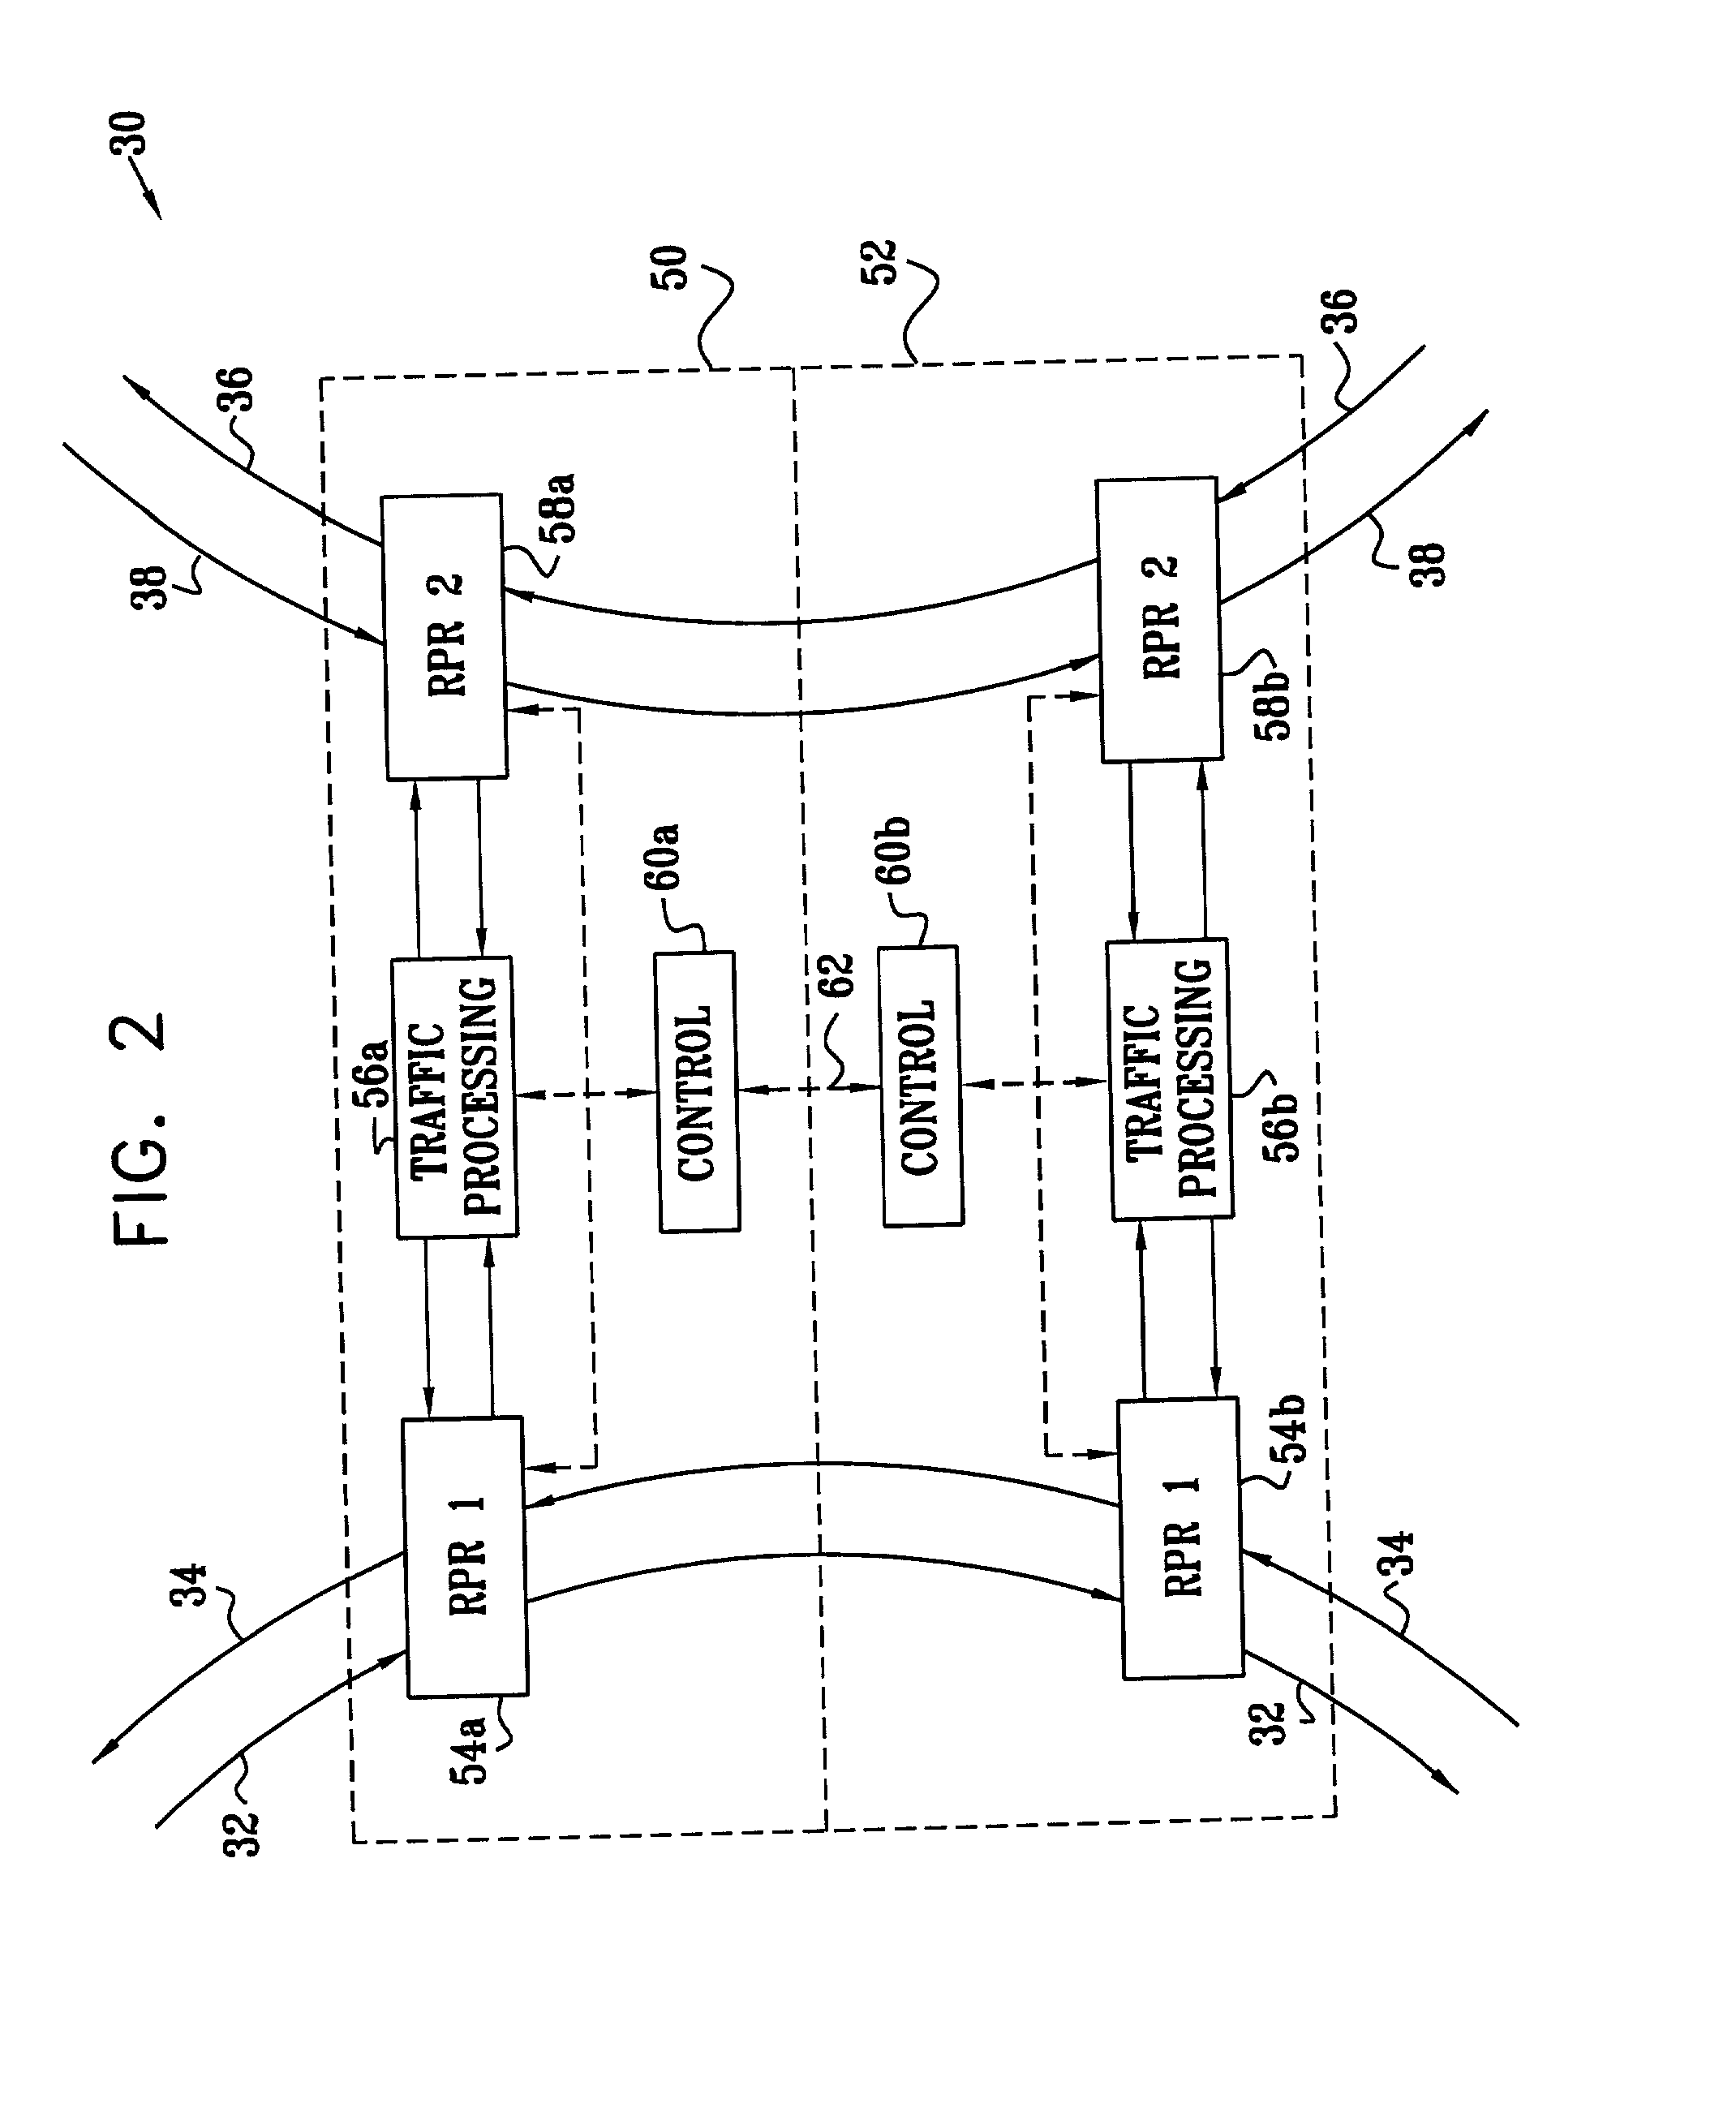 Interconnect and gateway protection in bidirectional ring networks